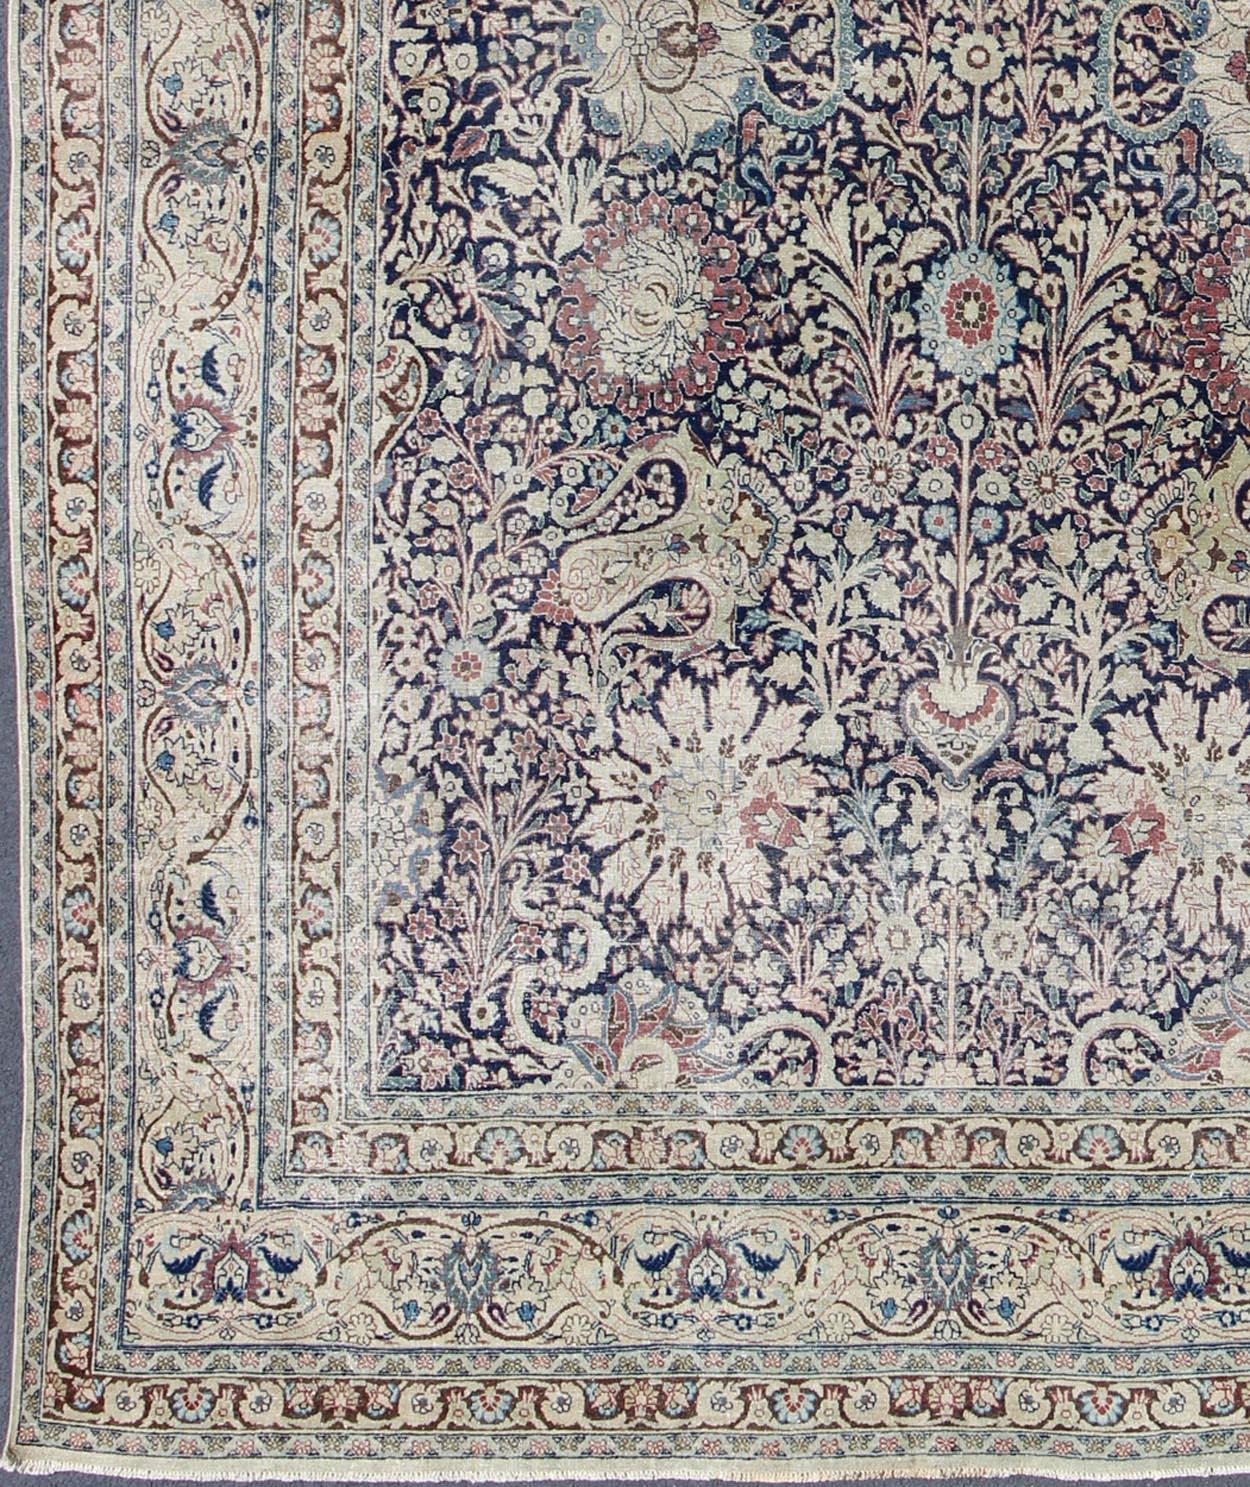 Navy Blue,  ivory and multi colors antique Persian Tabriz rug with all-over large scale floral design, rug zir-5, country of origin / type: Iran / Tabriz, circa 1910

This antique Persian Tabriz carpet (circa early 20th century) features a refined